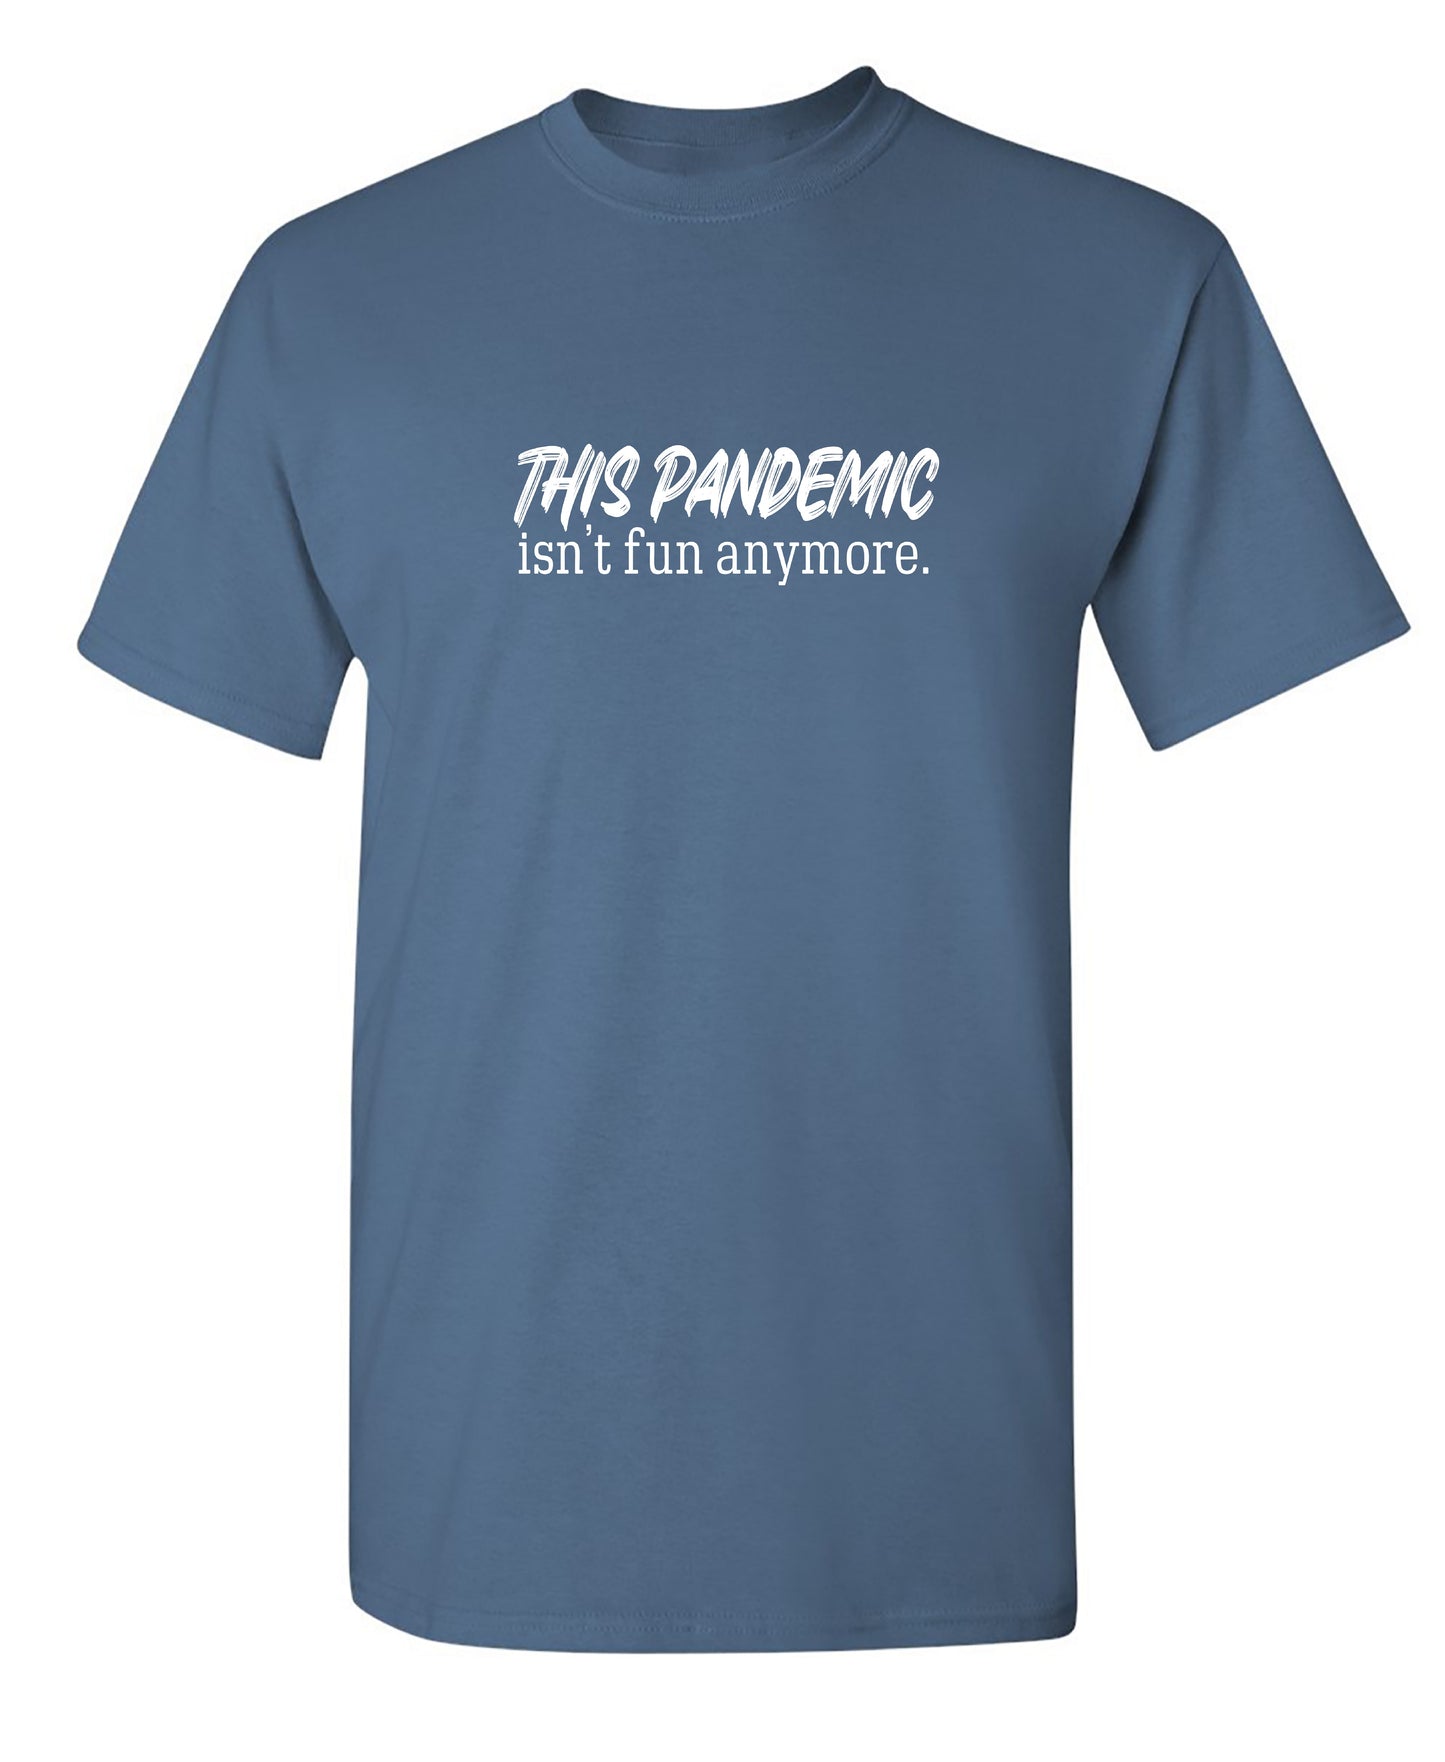 This Pandemic Isn't Fun Anymore - Funny T Shirts & Graphic Tees